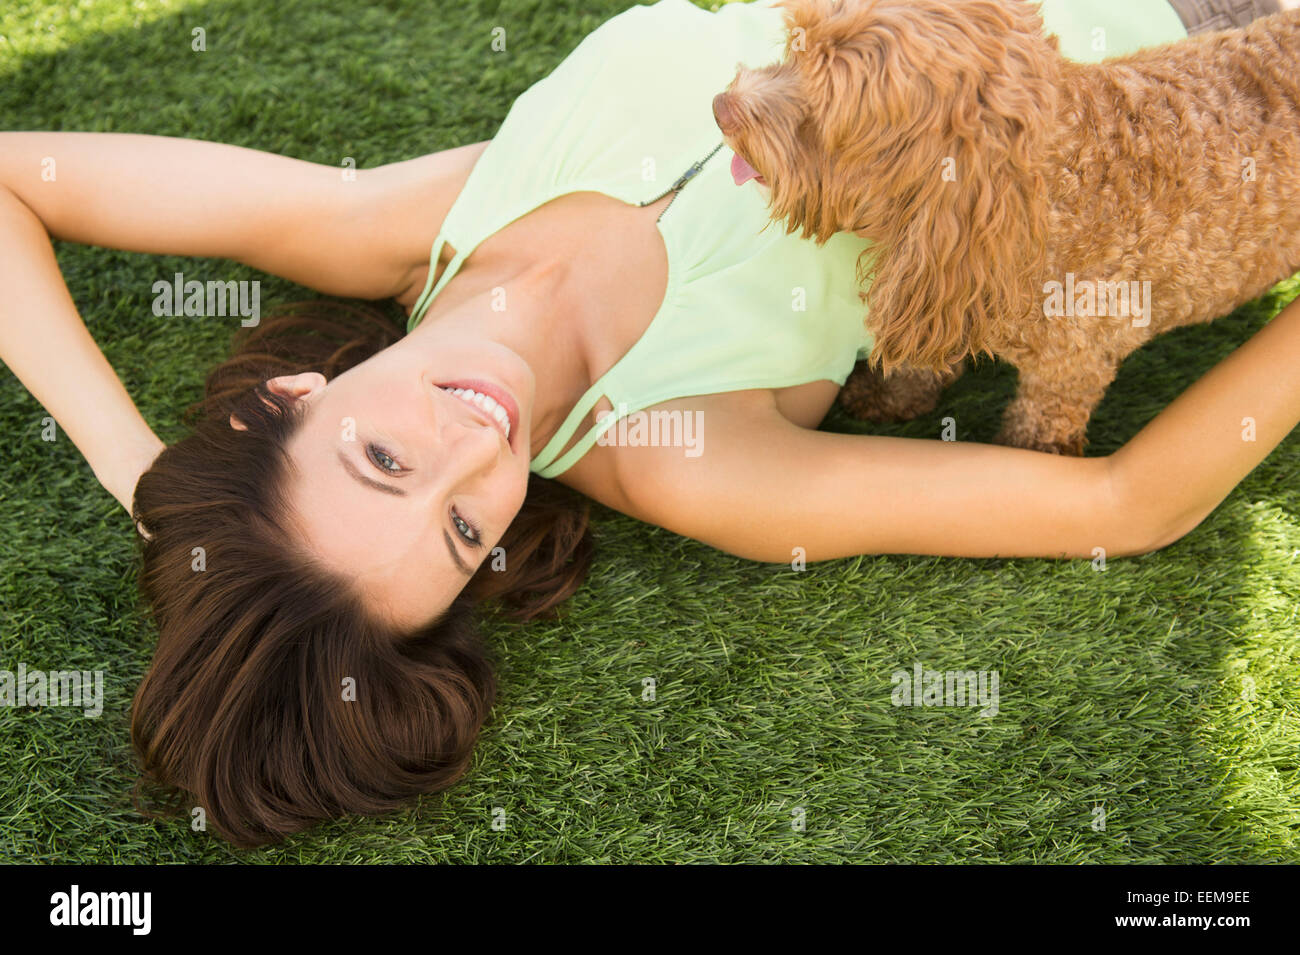 Caucasian woman playing with dog on lawn Stock Photo